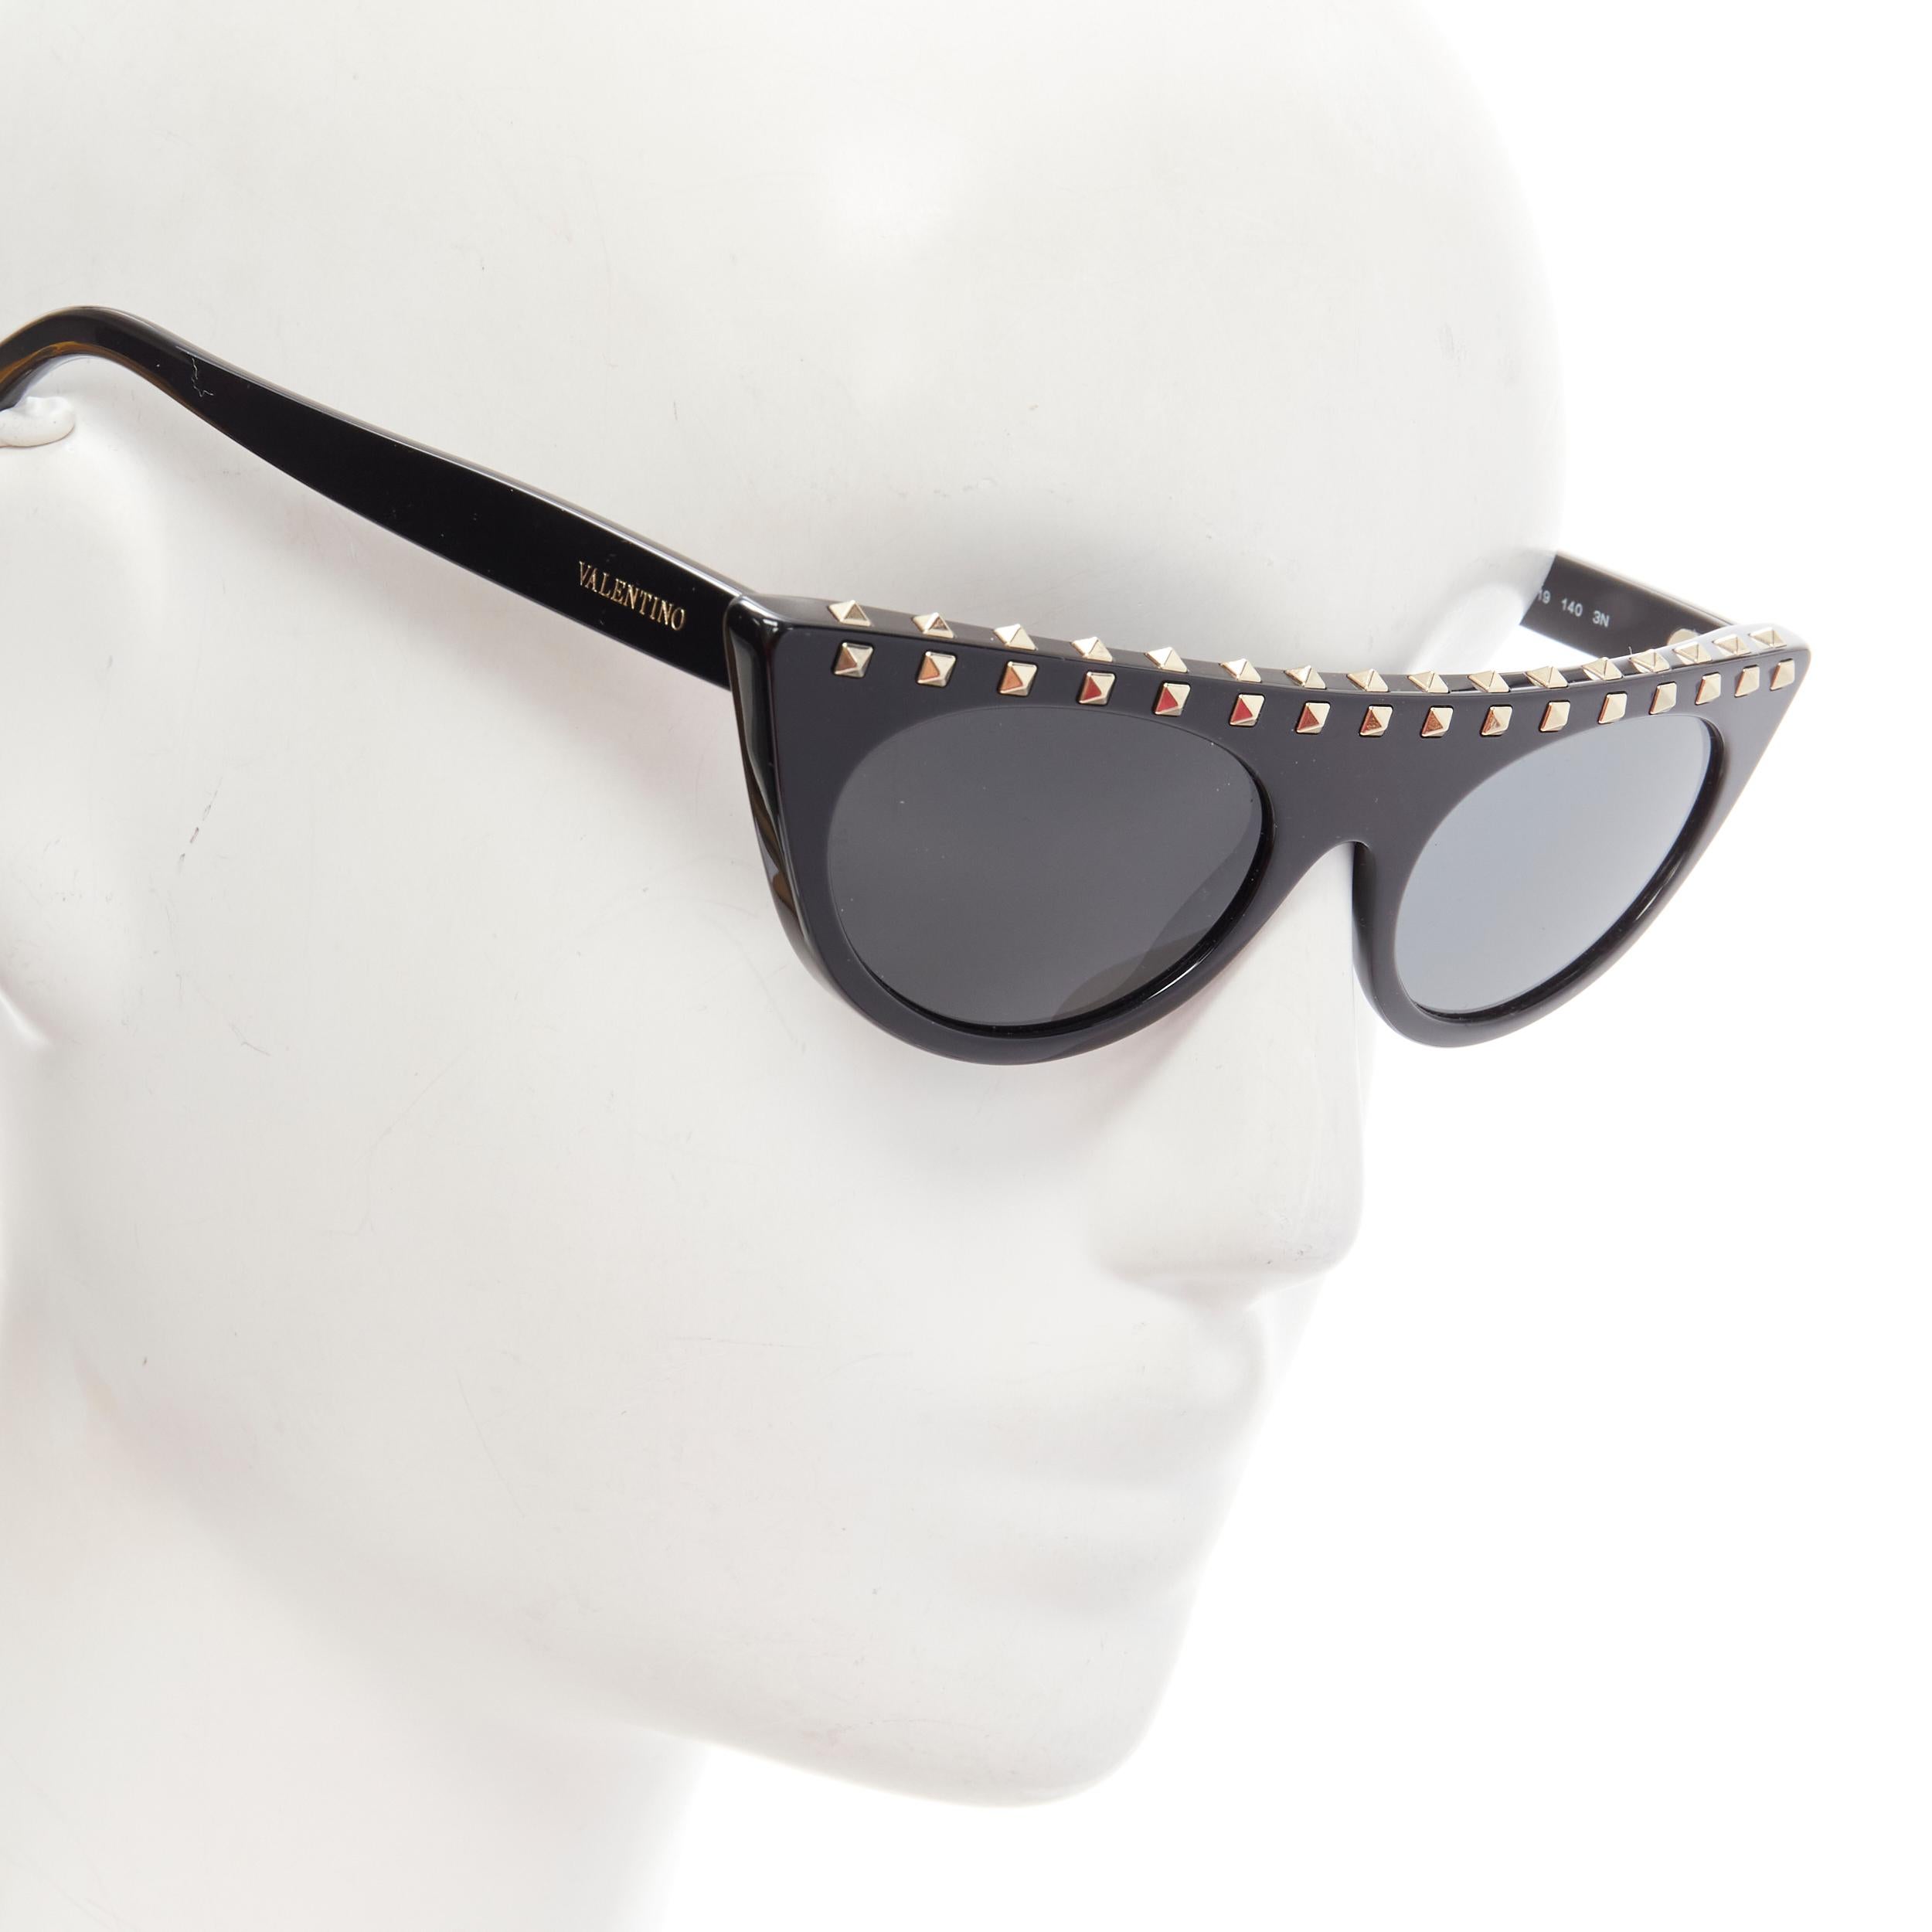 VALENTINO VA4018 Rockstud black gold studded cateye sunglasses 
Reference: ANWU/A00089 
Brand: Valentino 
Collection: Rockstud 
Material: Acetate 
Color: Black 
Pattern: Solid 
Made in: Italy 


CONDITION: 
Condition: Excellent, this item was